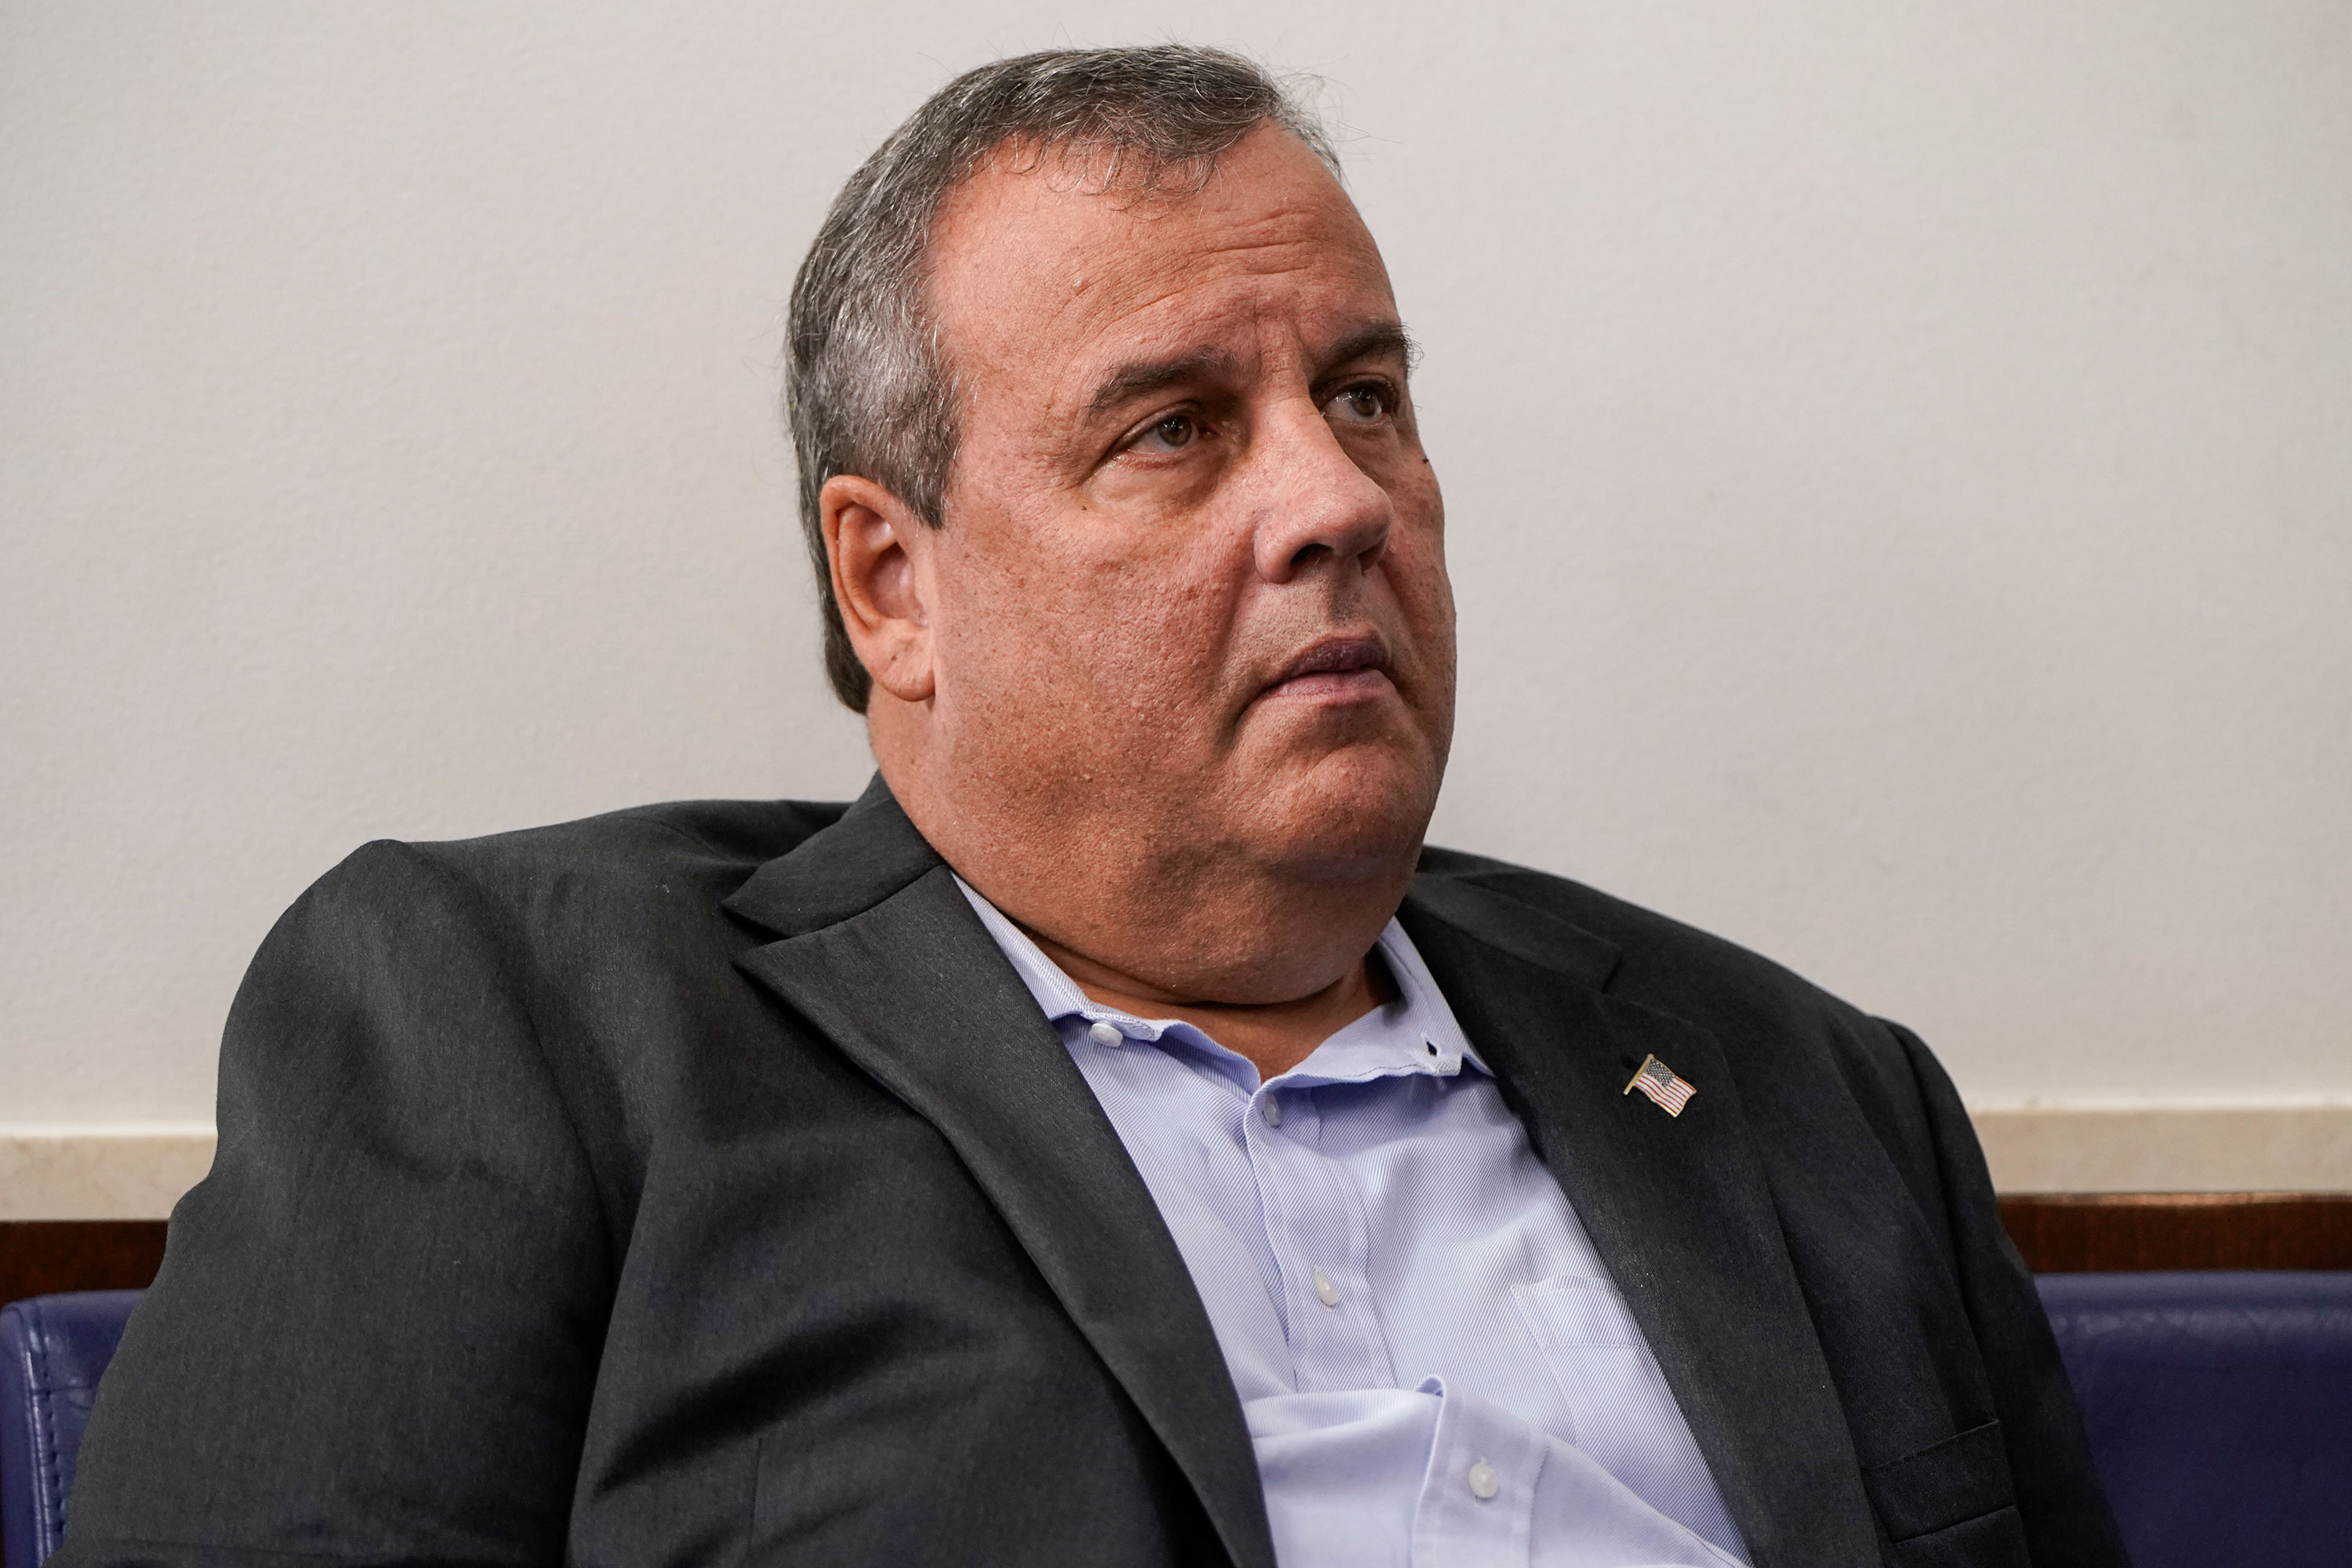 Former New Jersey Gov. Chris Christie attends a news conference at the White House on September 27 in Washington, DC. 